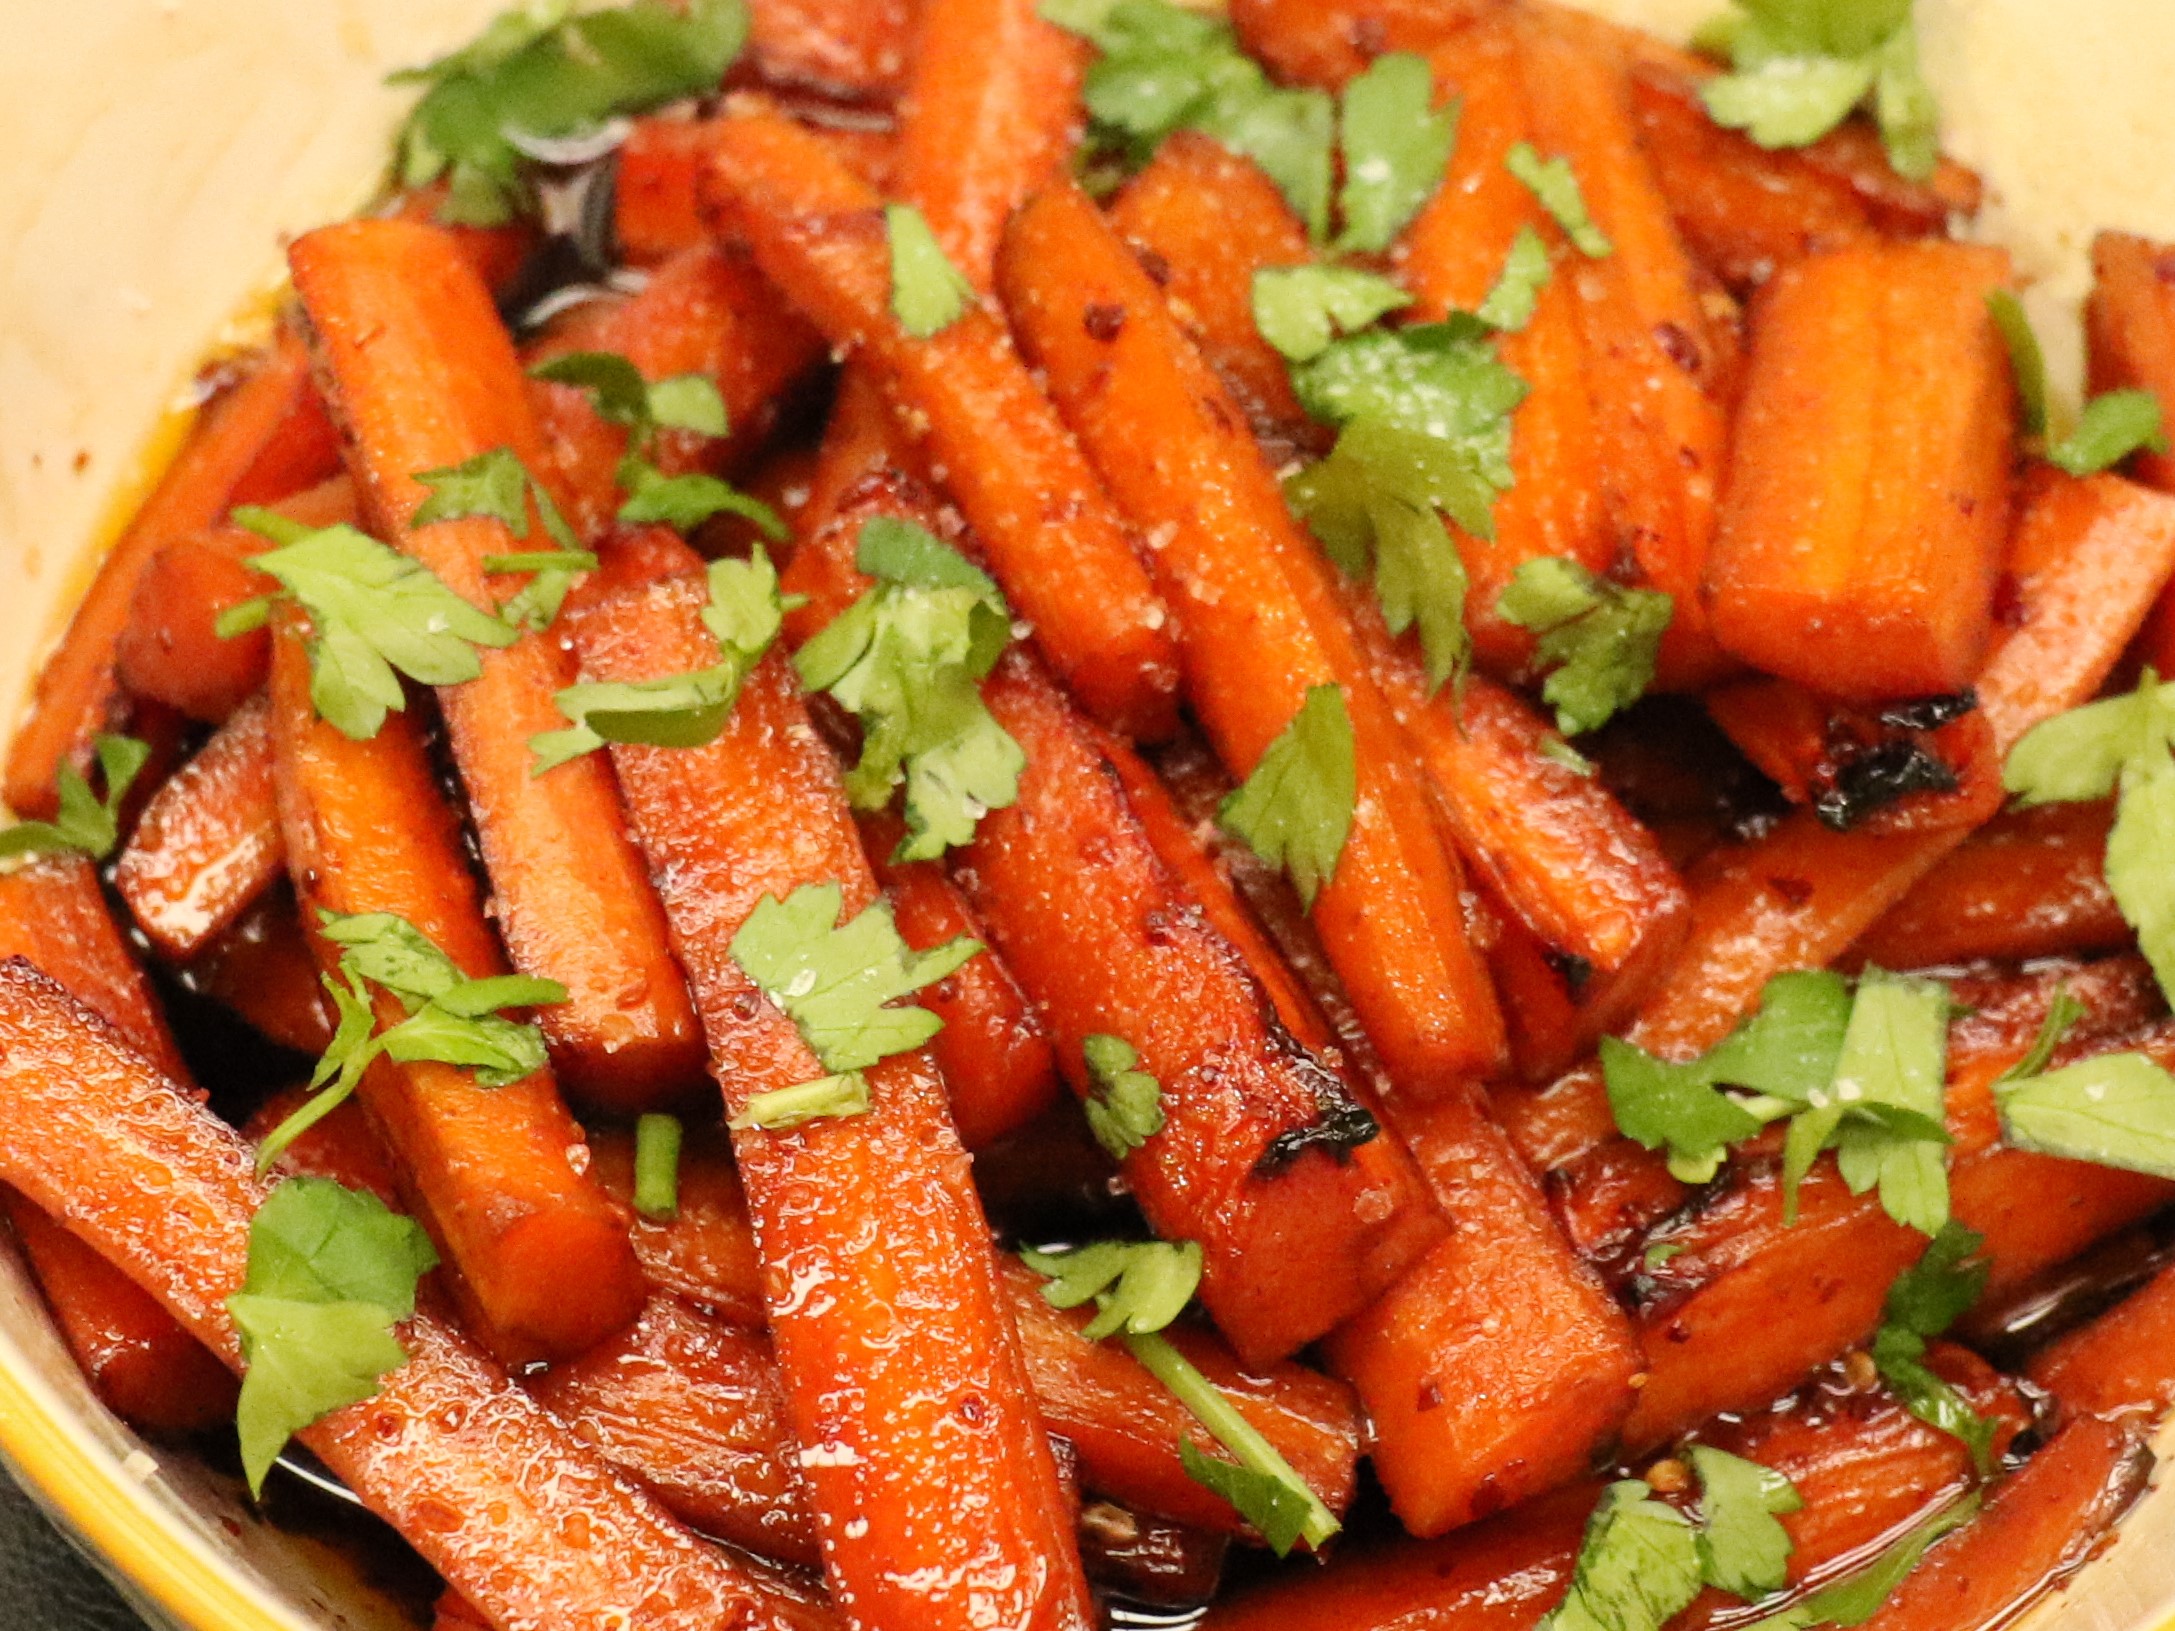 Balsamic Glazed Carrots featured image